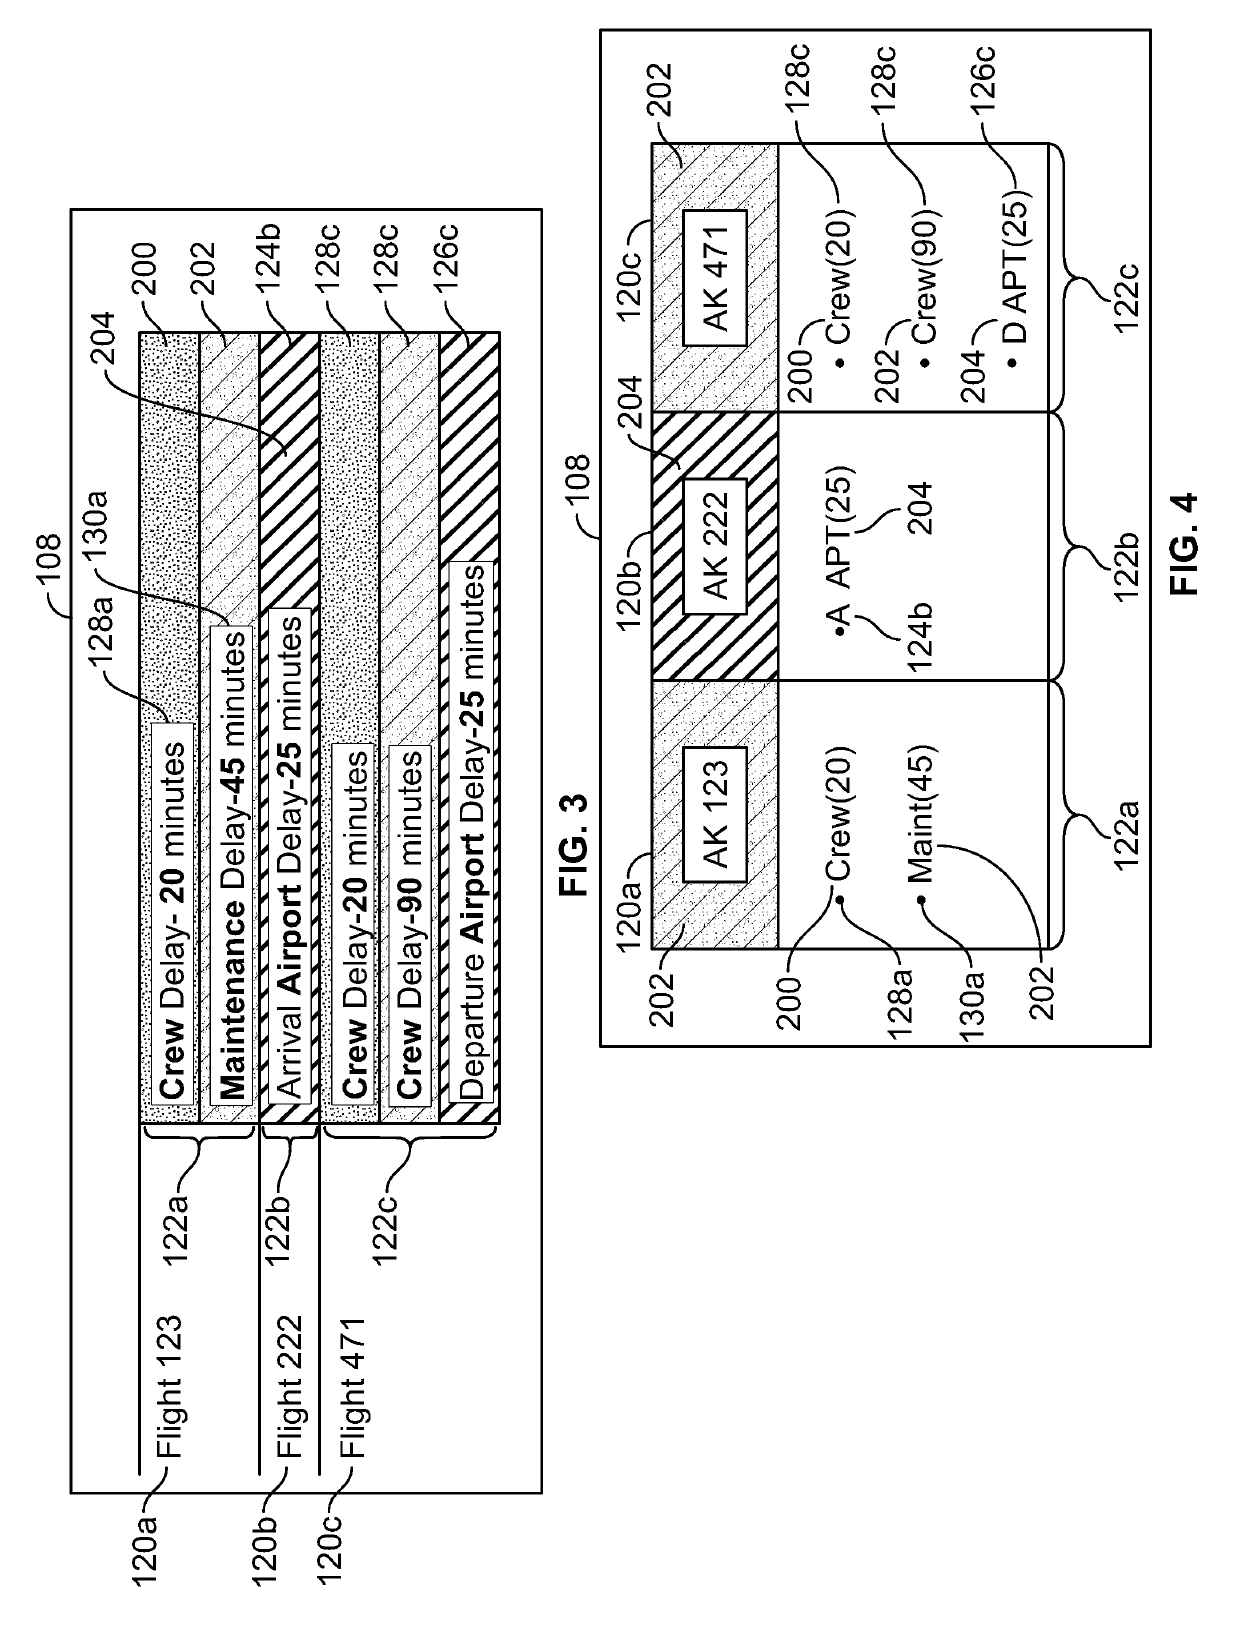 Flight schedule disruption awareness systems and methods